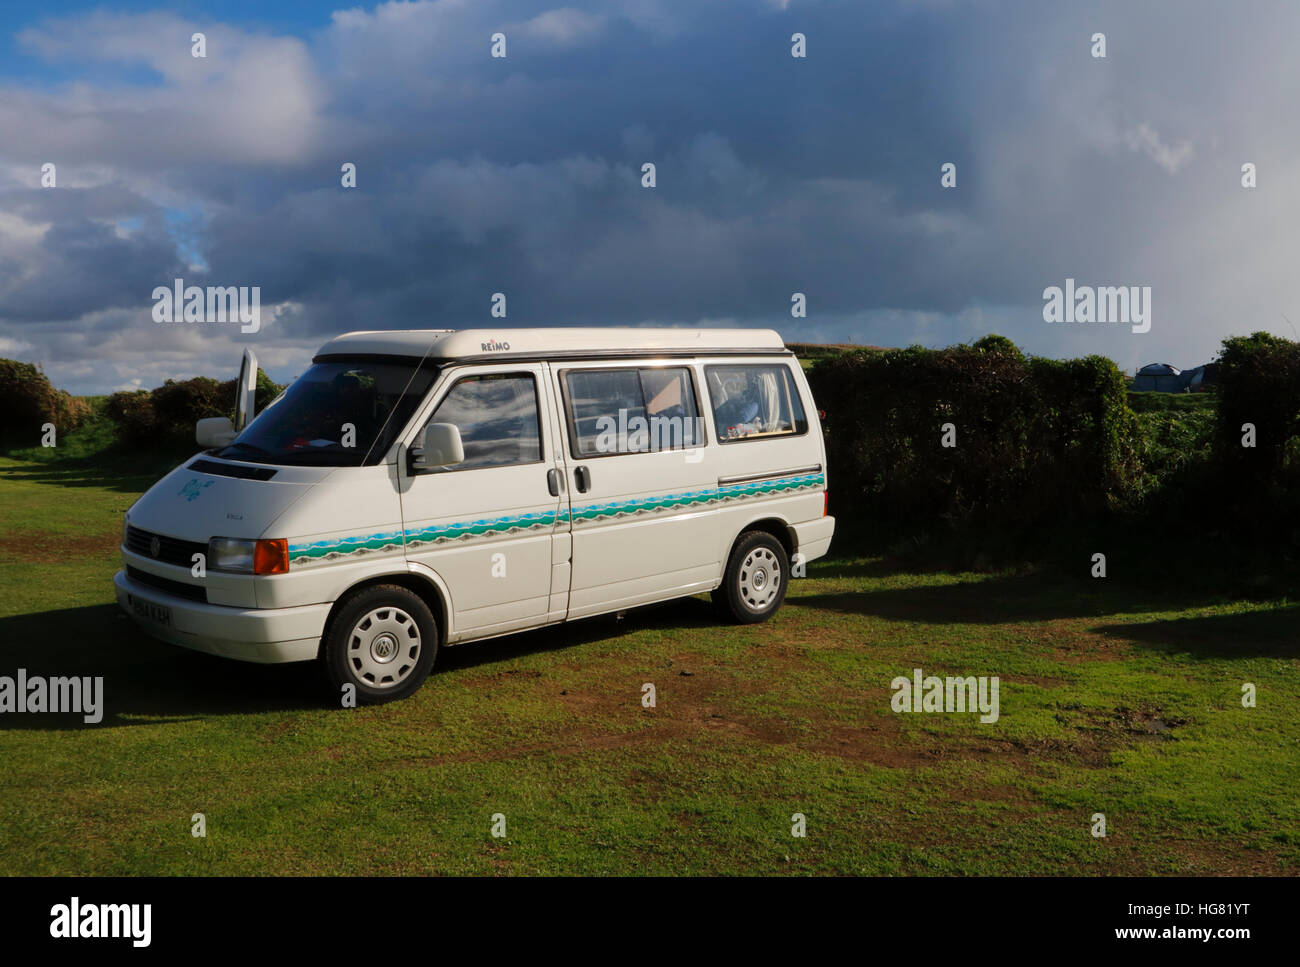 Volkswagen T4 Transporter Camper Van High Resolution Stock Photography and  Images - Alamy